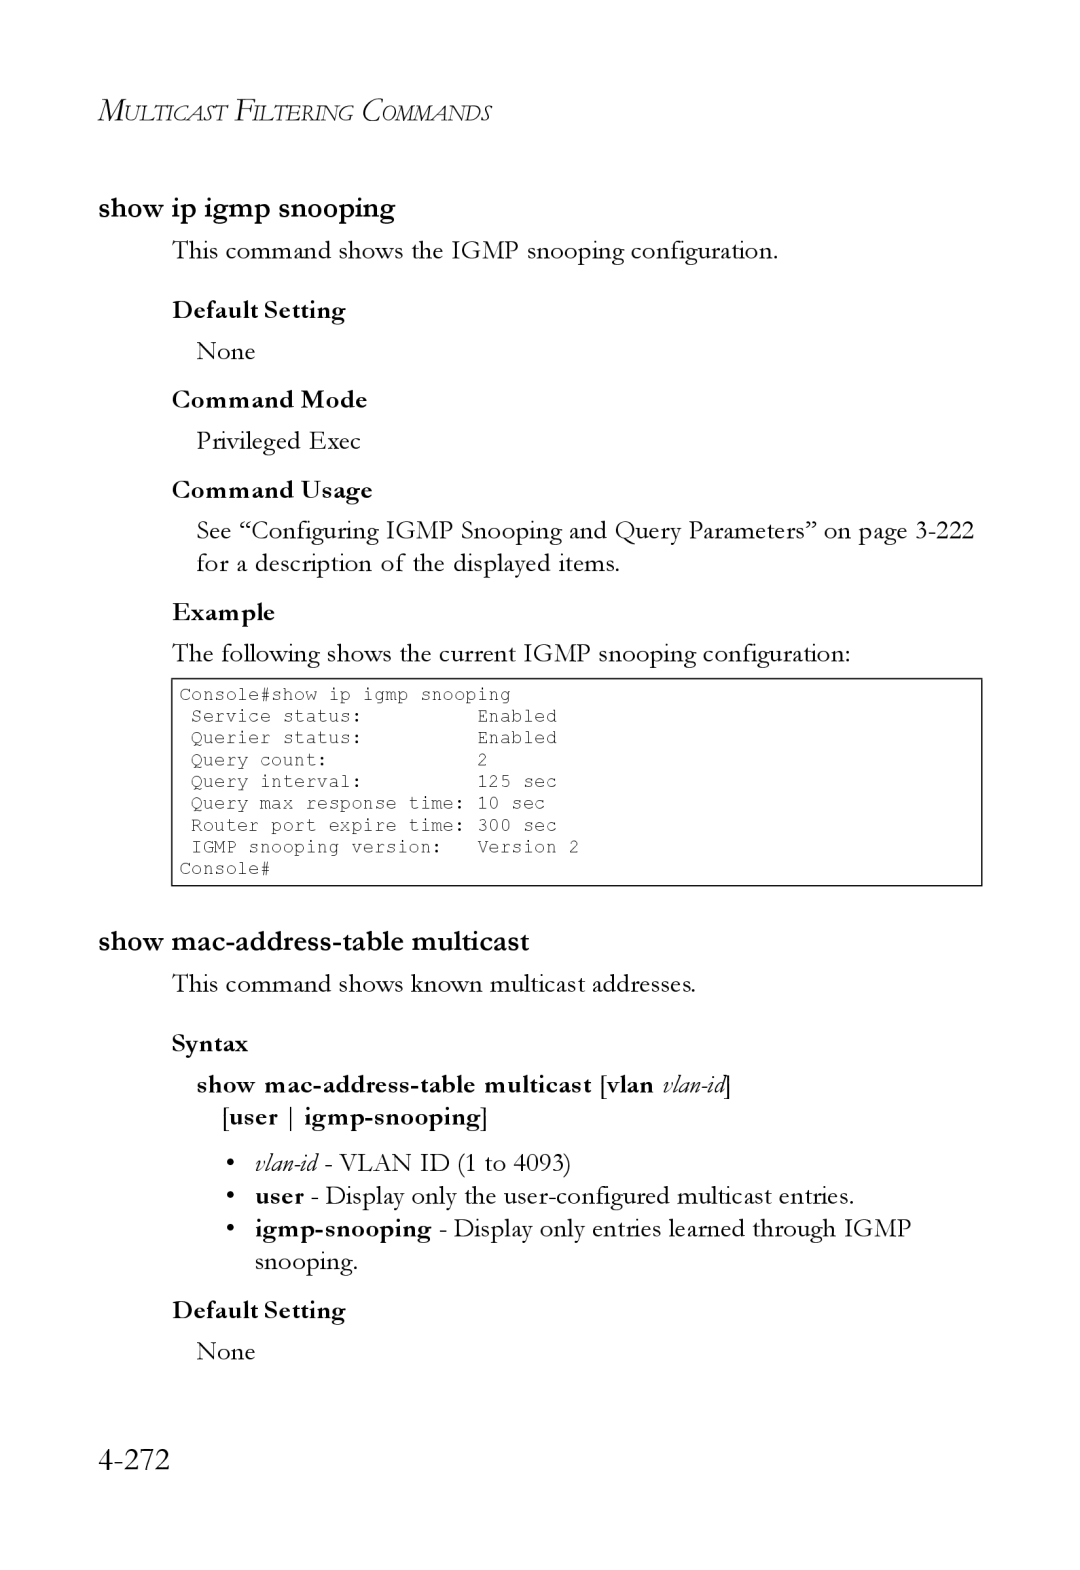 SMC Networks SMC6824M manual 272, Show ip igmp snooping, Show mac-address-table multicast 